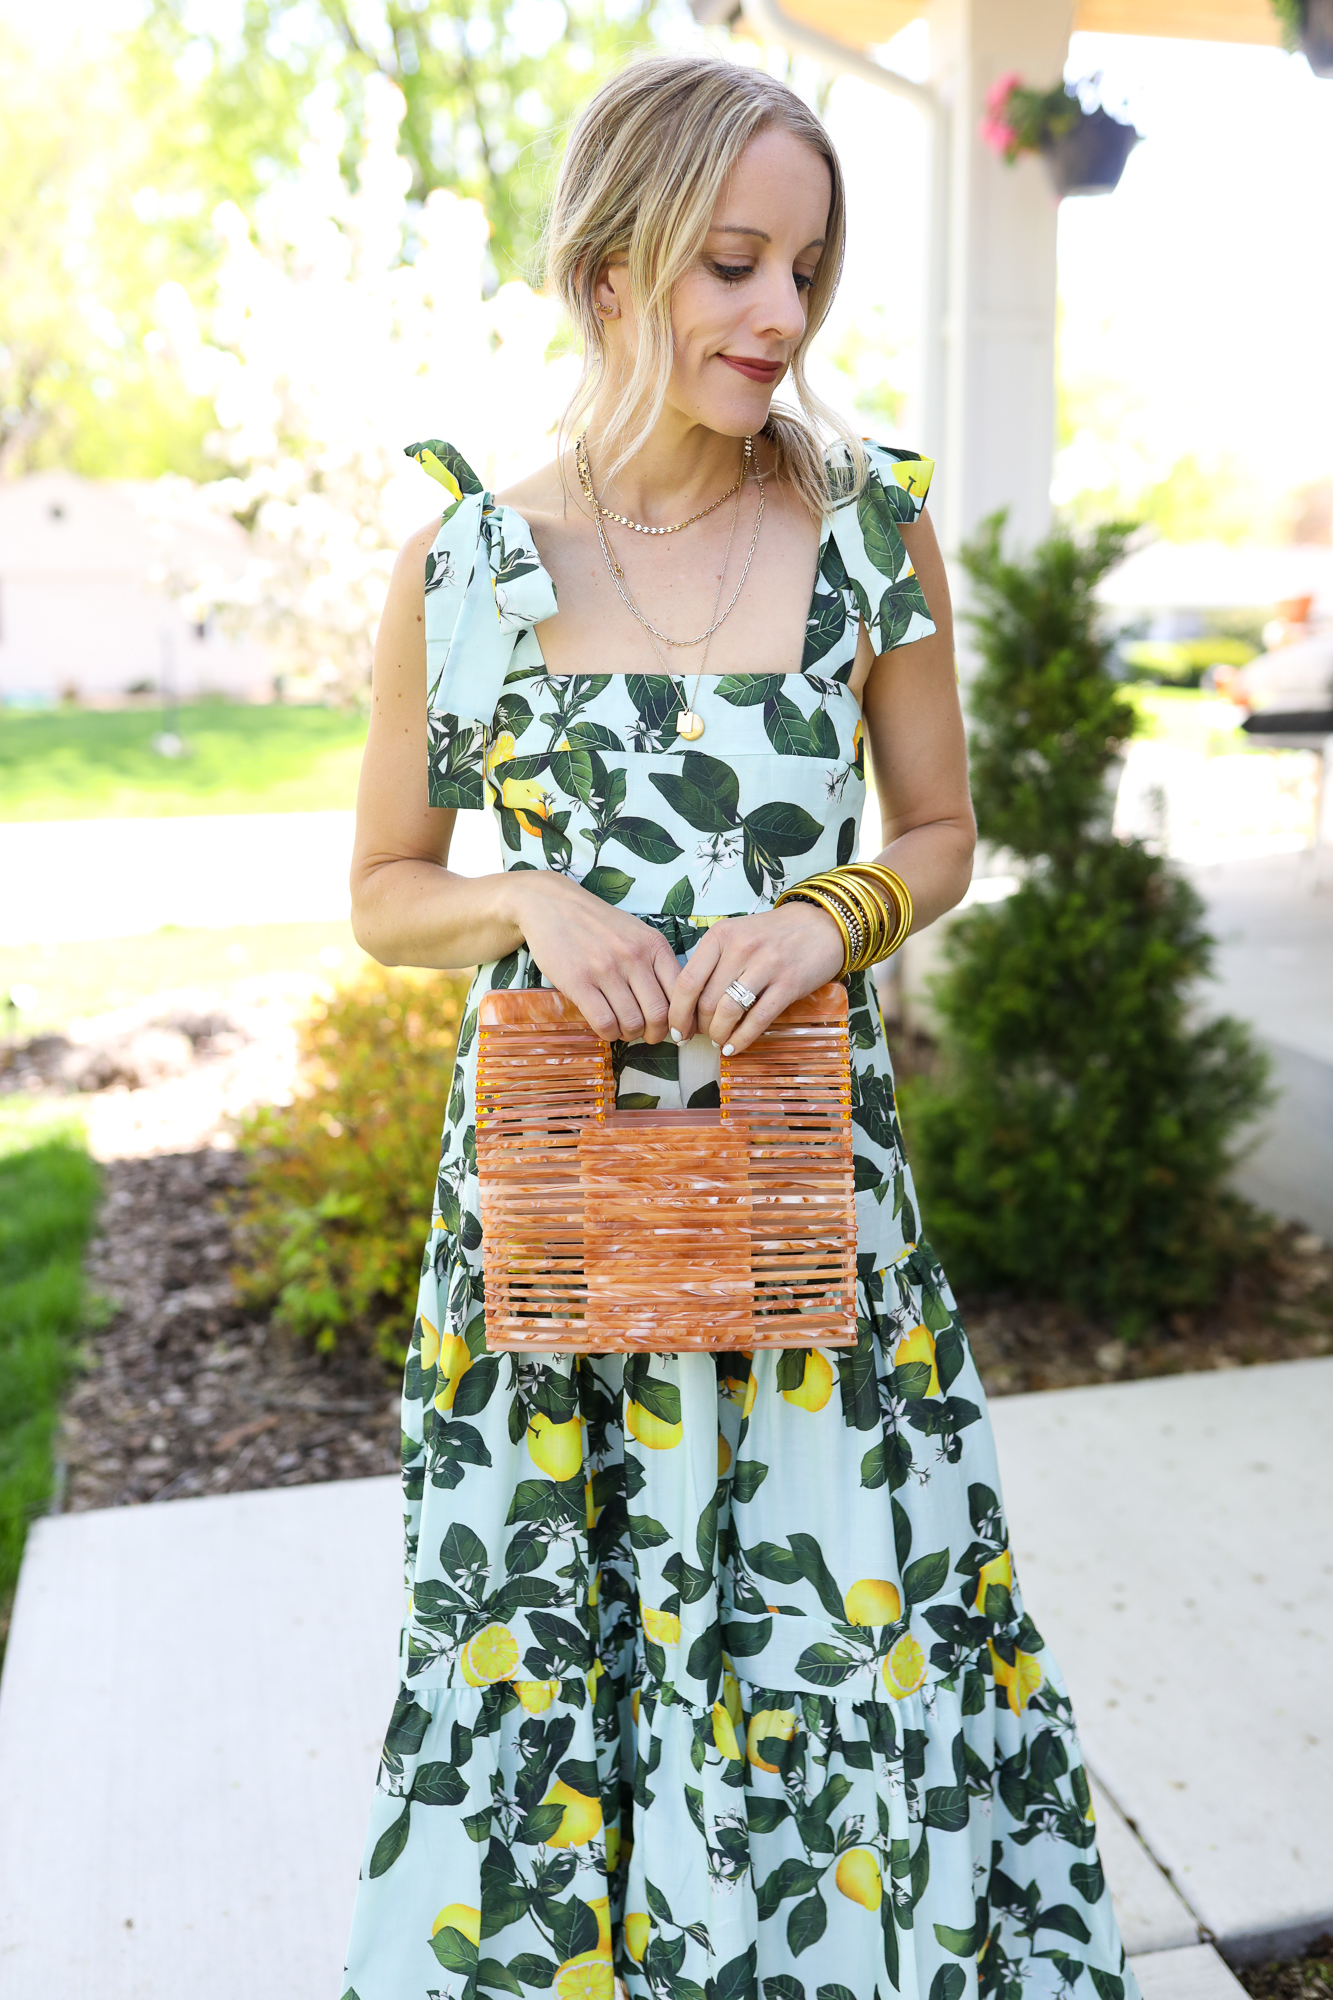 woman in blue and green dress holding bag